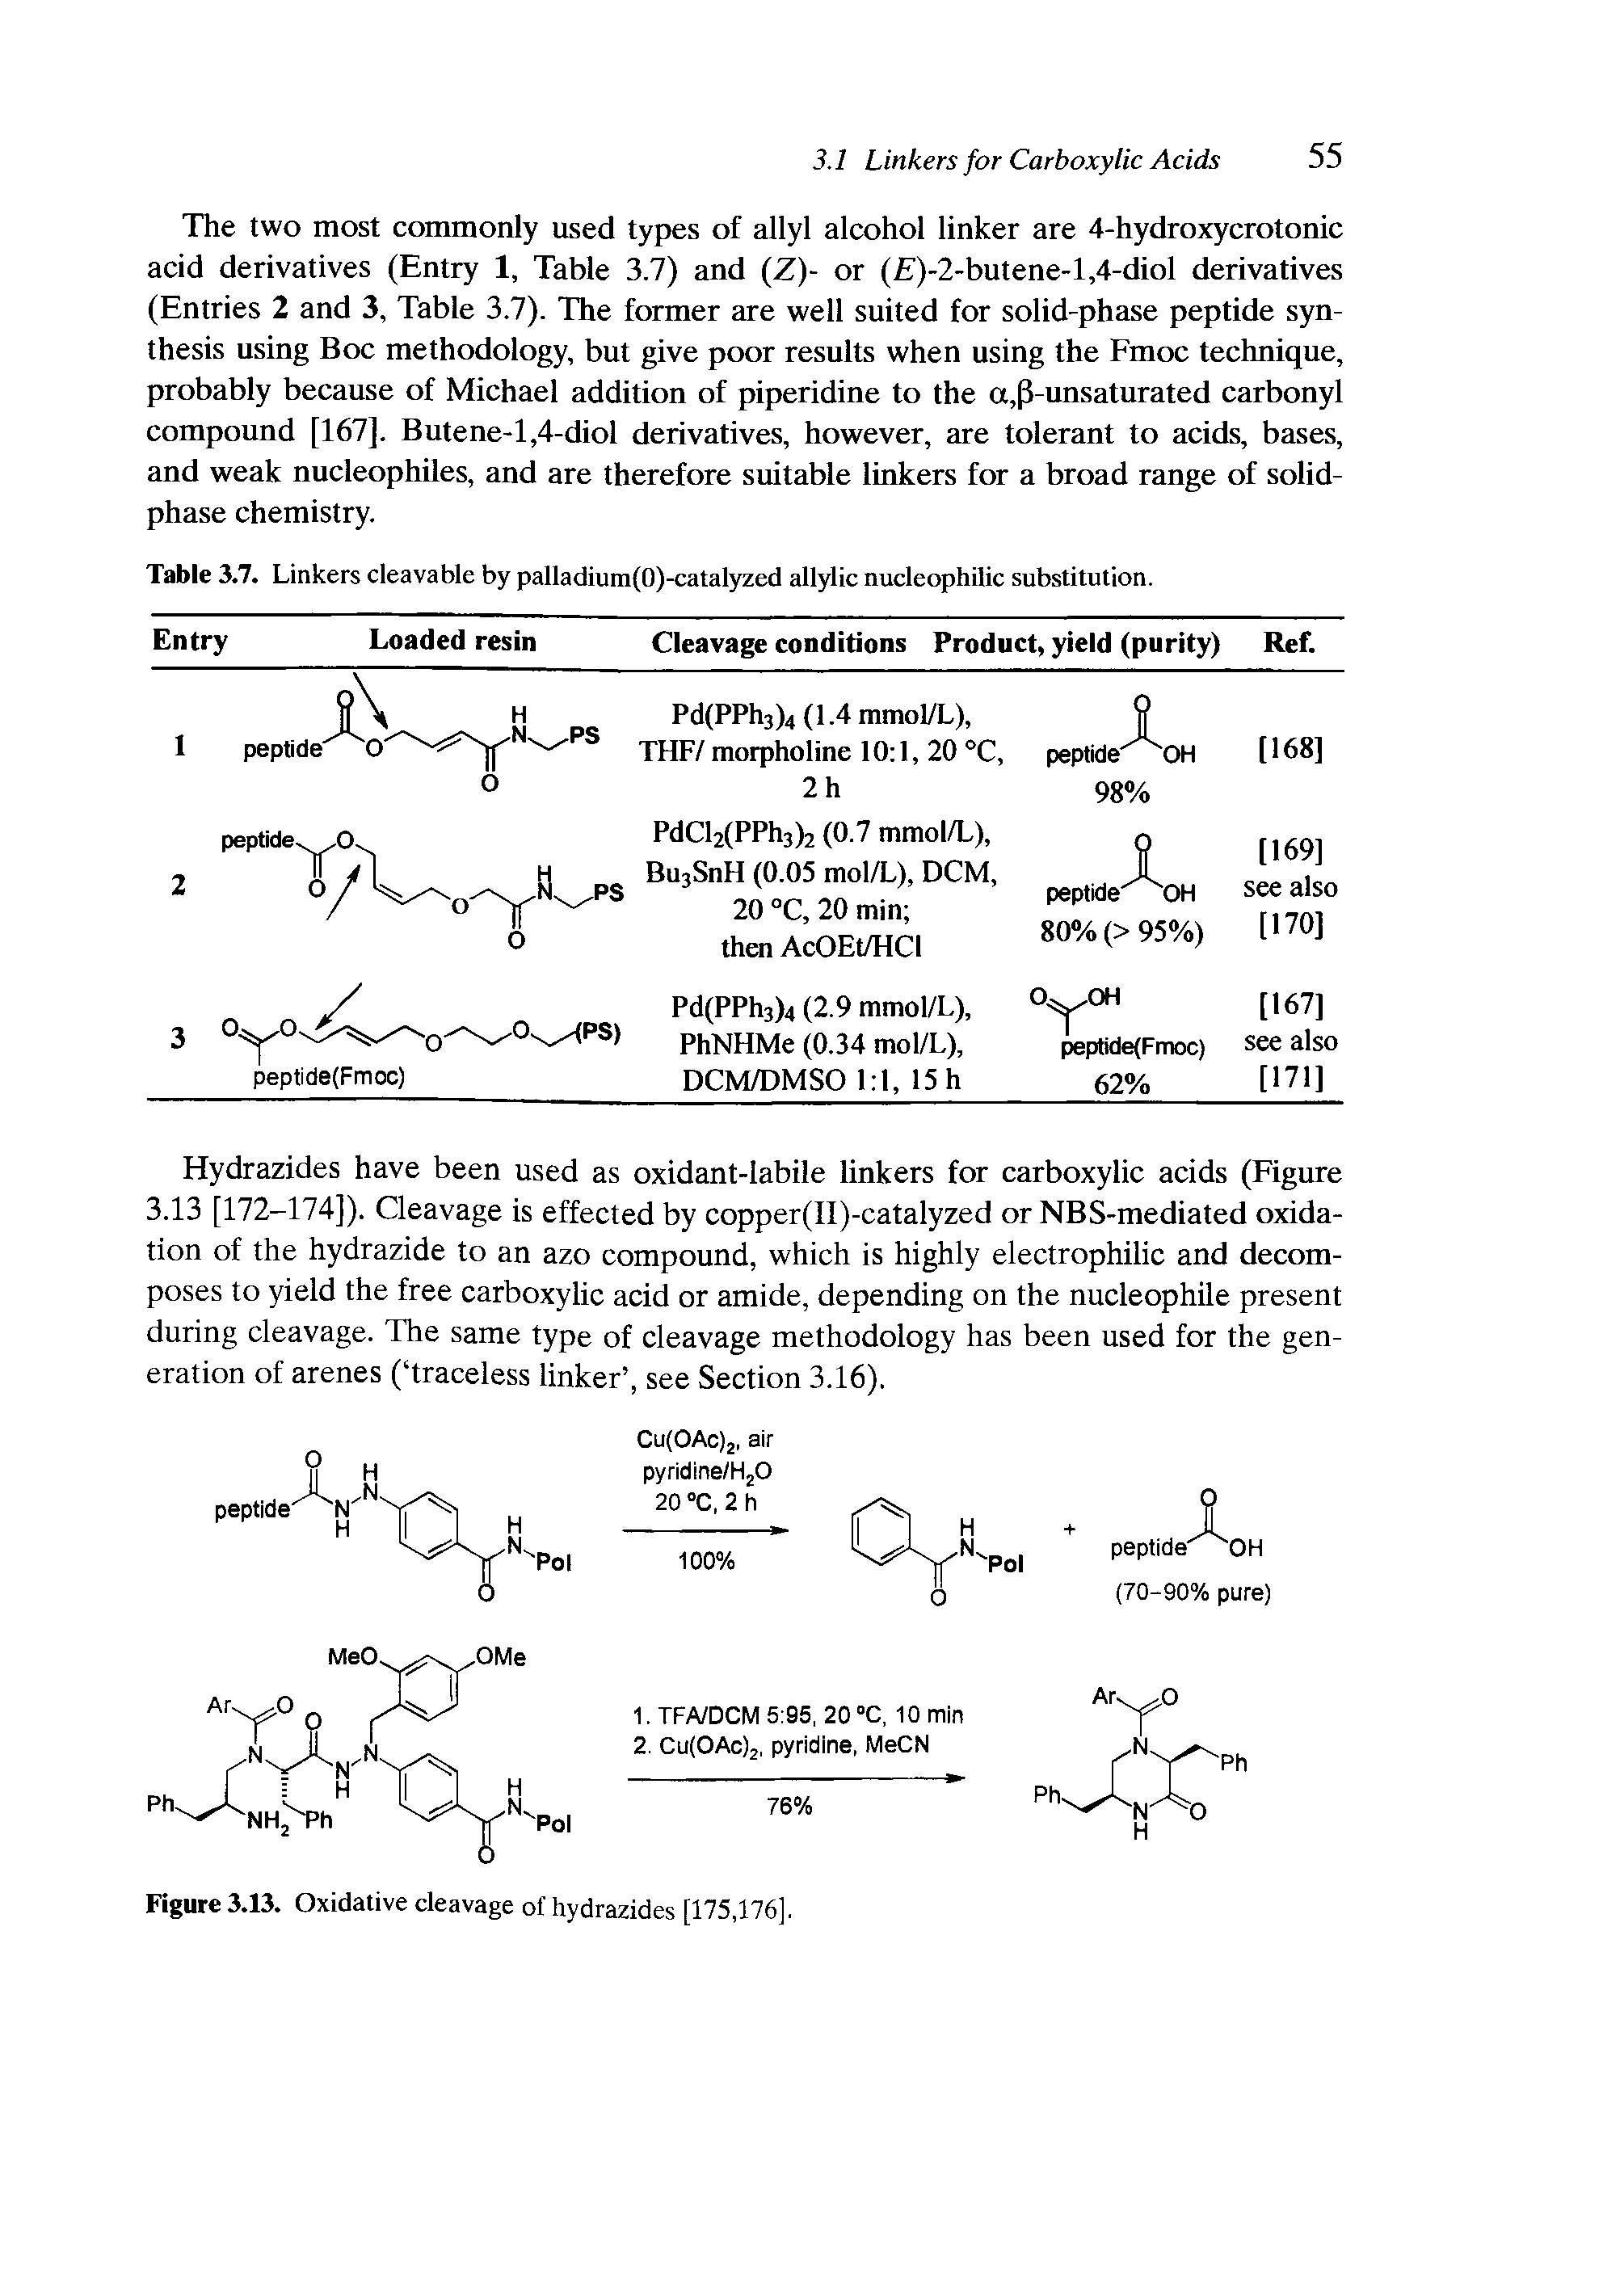 Table 3.7. Linkers cleavable by palladium(0)-catalyzed allylic nucleophilic substitution.